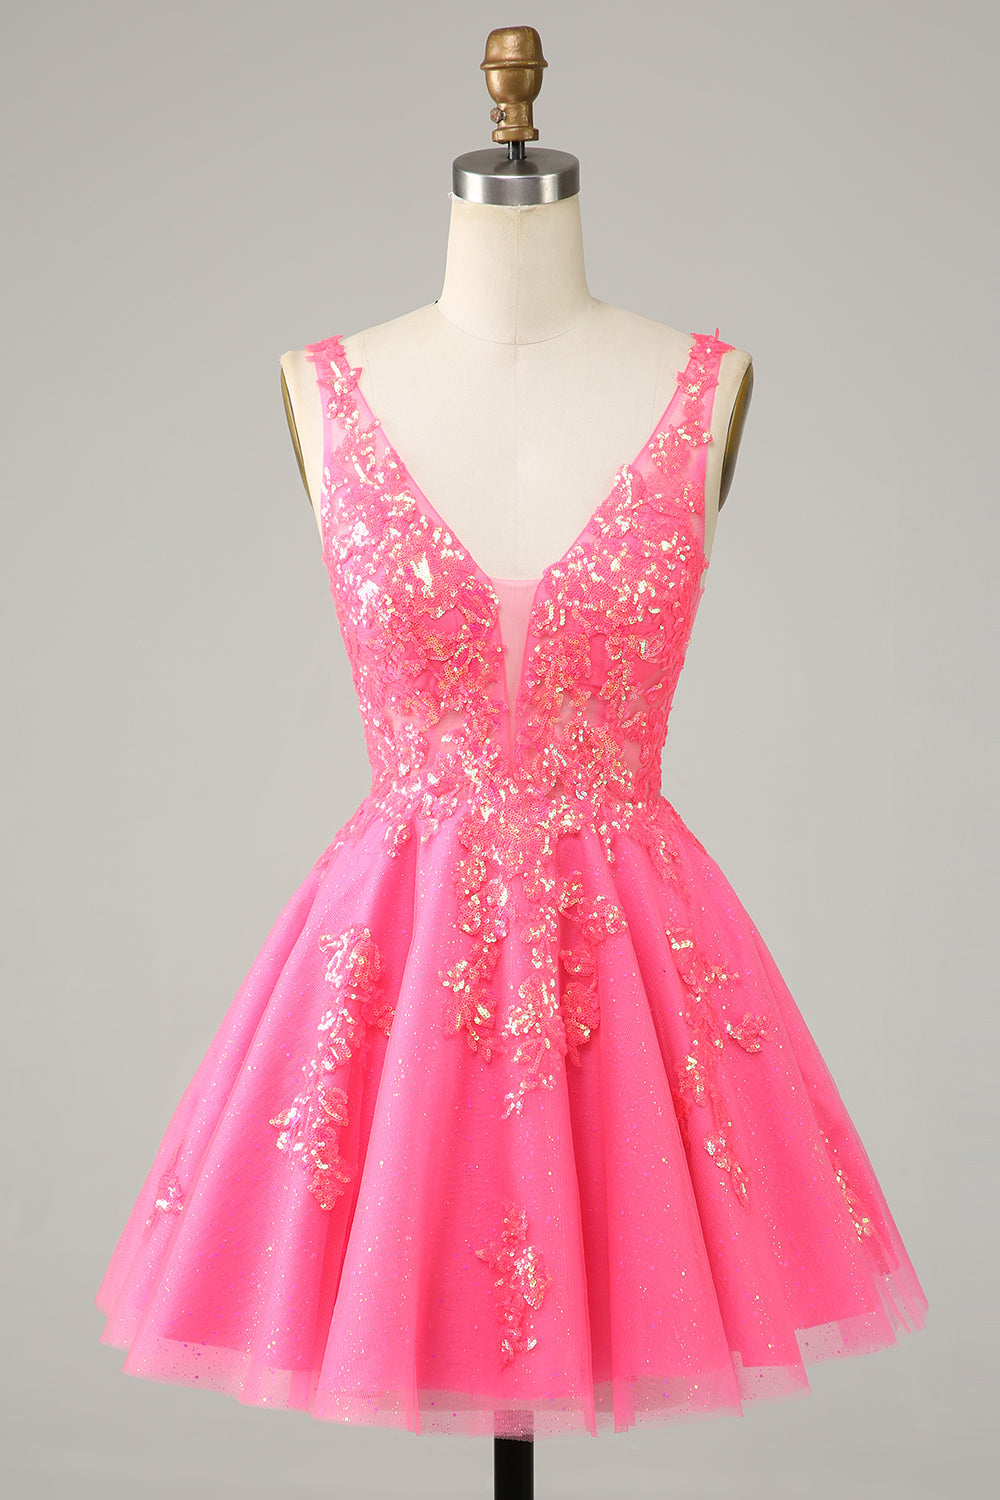 Orange Cute Sparkly Homecoming Dress with Sequins Appliques